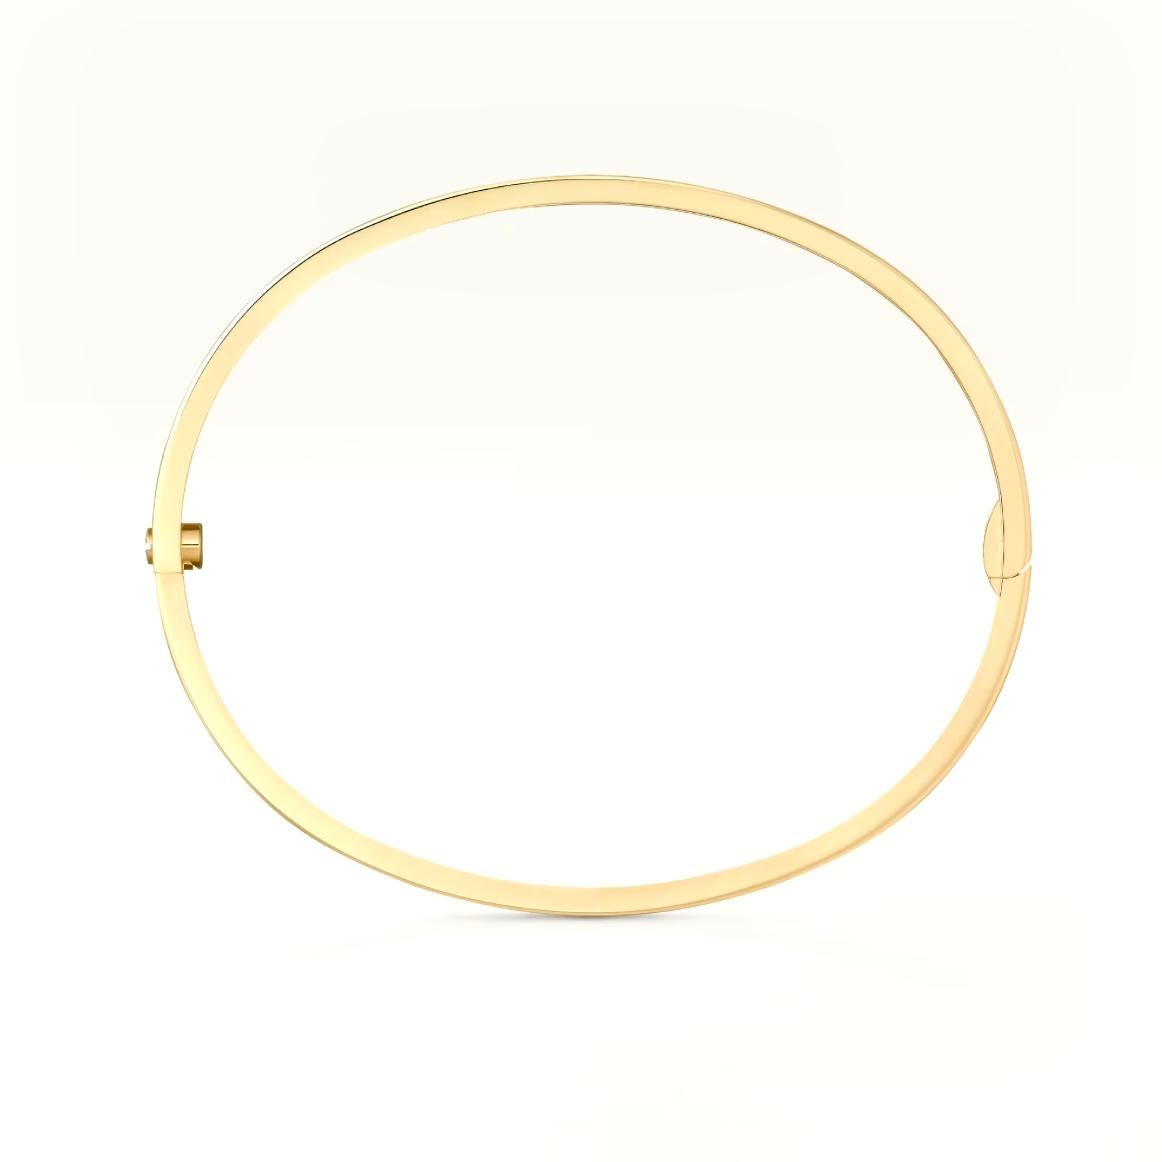 Designer: Cartier
Collection:  Love
Style: Bangle
Metal: Yellow Gold 
Metal Purity: 18K 
Stones: 6 Round Brilliant Cut Diamonds
Screw Style System: New Screw System 
Bracelet Size: 19 = 19 cm
Hallmarks: Cartier; Serial #, 750
Includes:  24 Months